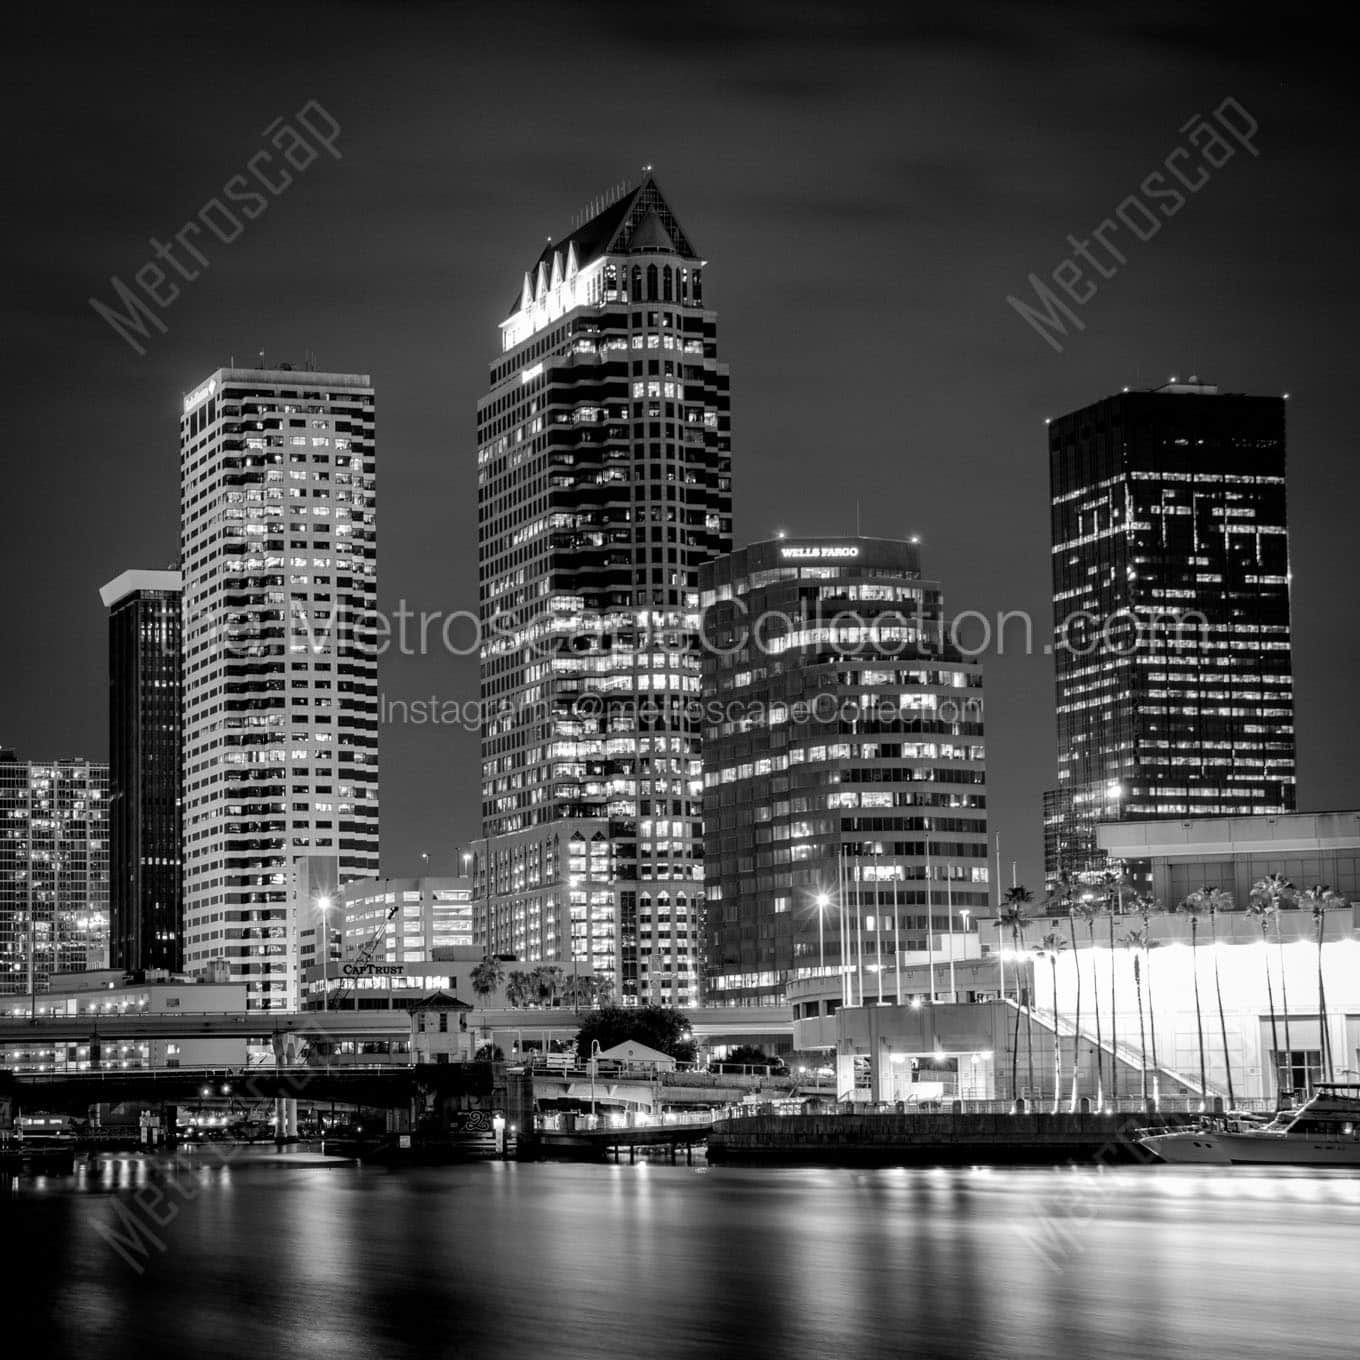 downtown tampa florida city skyline at night Black & White Office Art